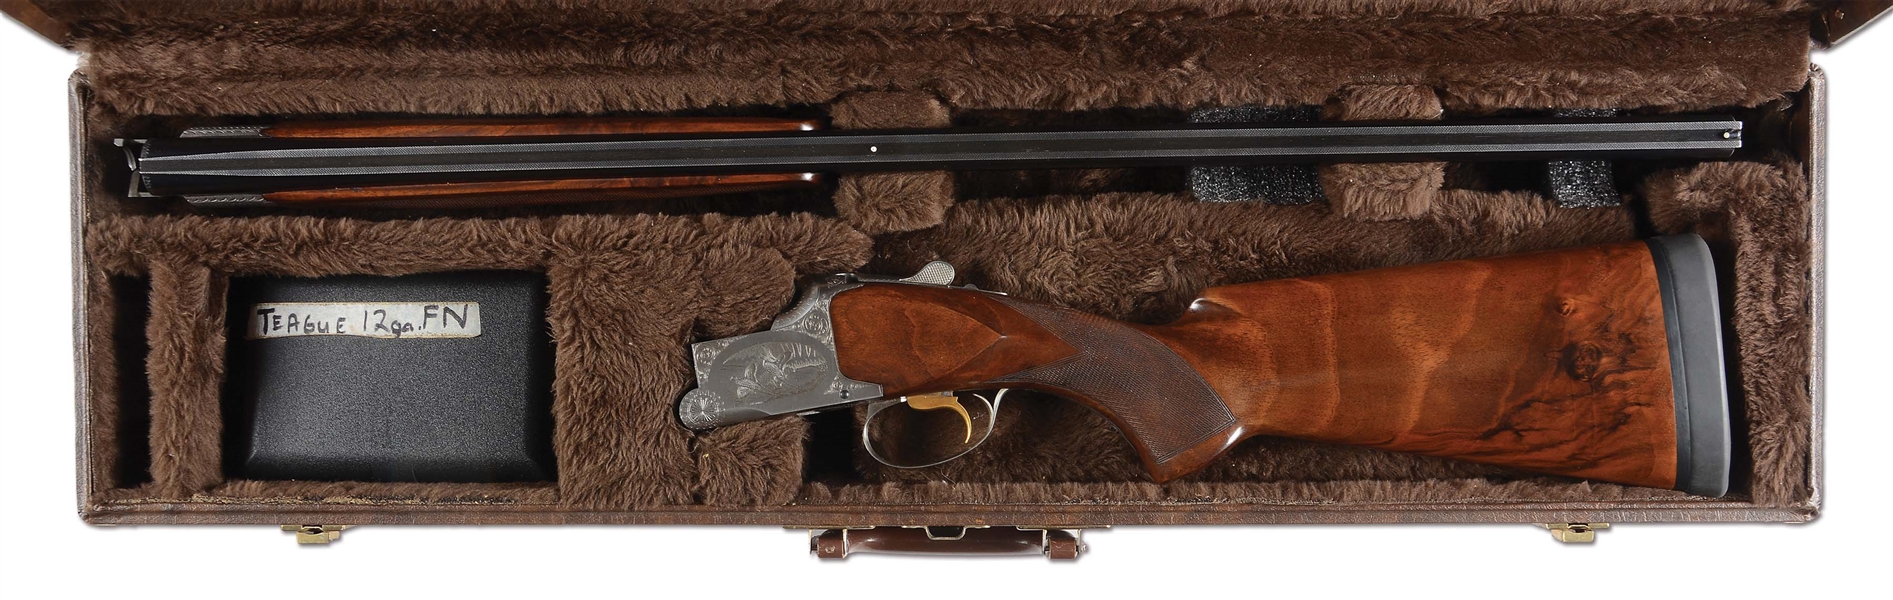 (C) FN BROWNING SUPERPOSED B2G OVER-UNDER TARGET SHOTGUN WITH CASE AND CHOKES.